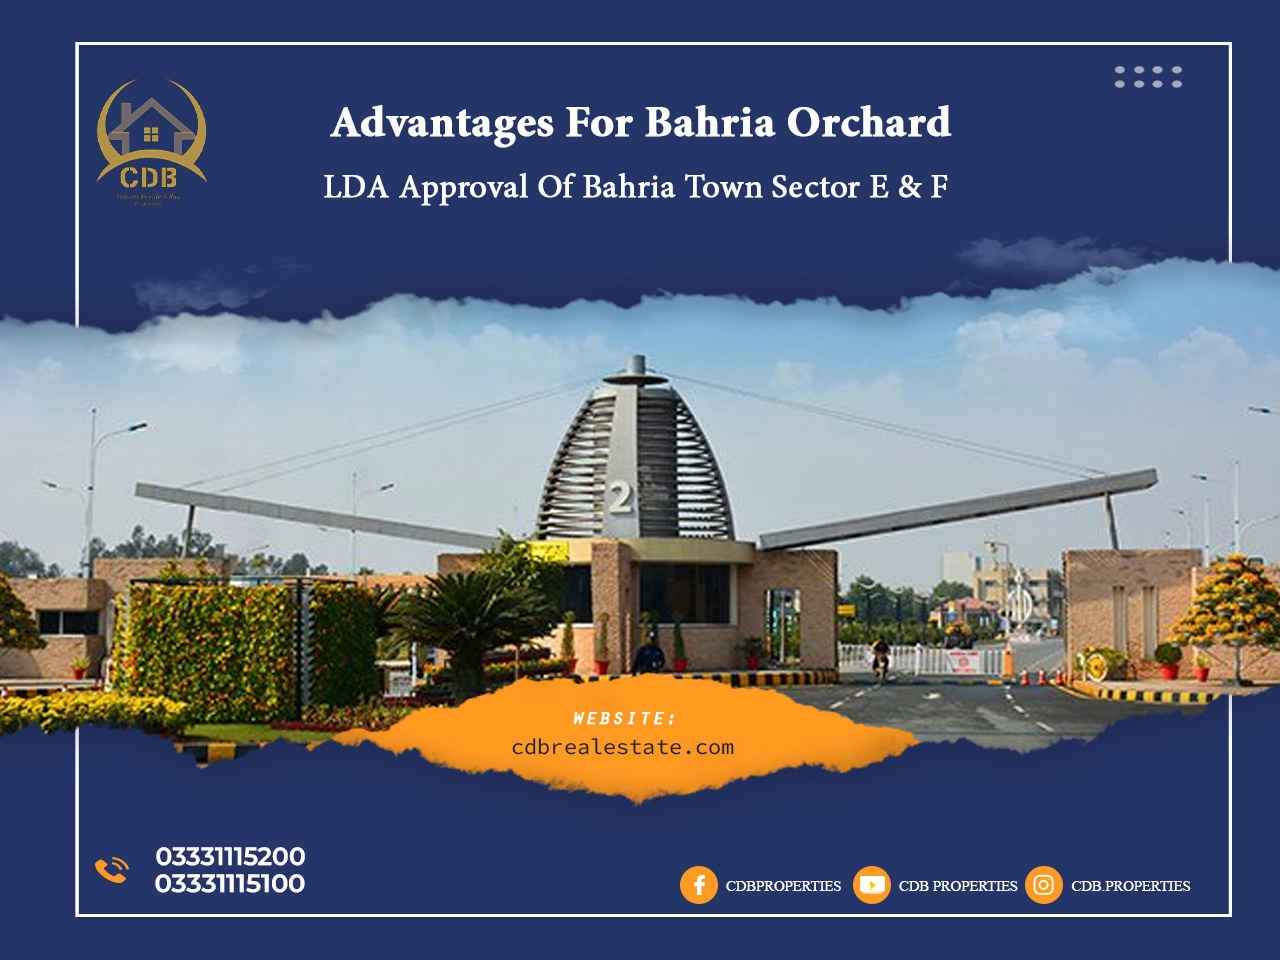 Advantages for bahria orchard